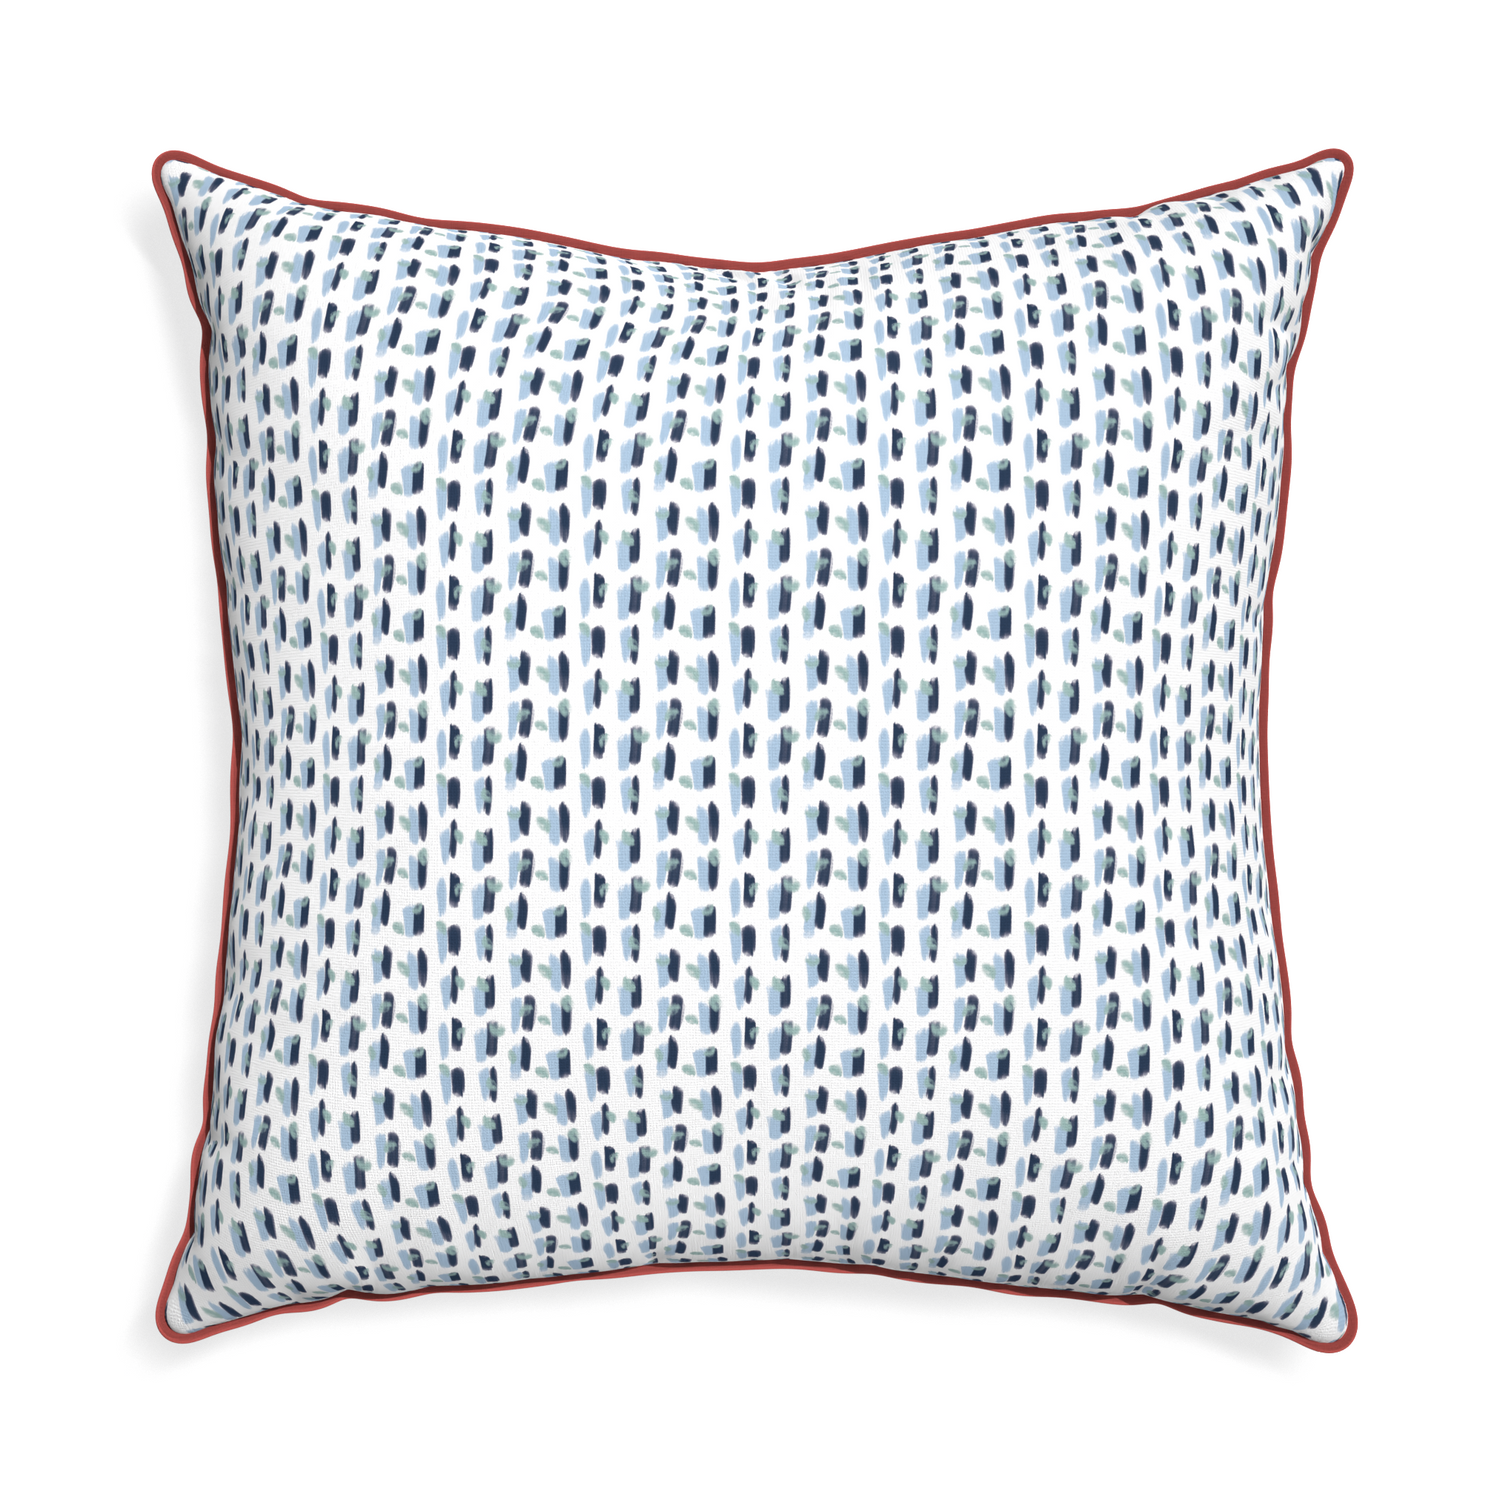 Euro-sham poppy blue custom pillow with c piping on white background